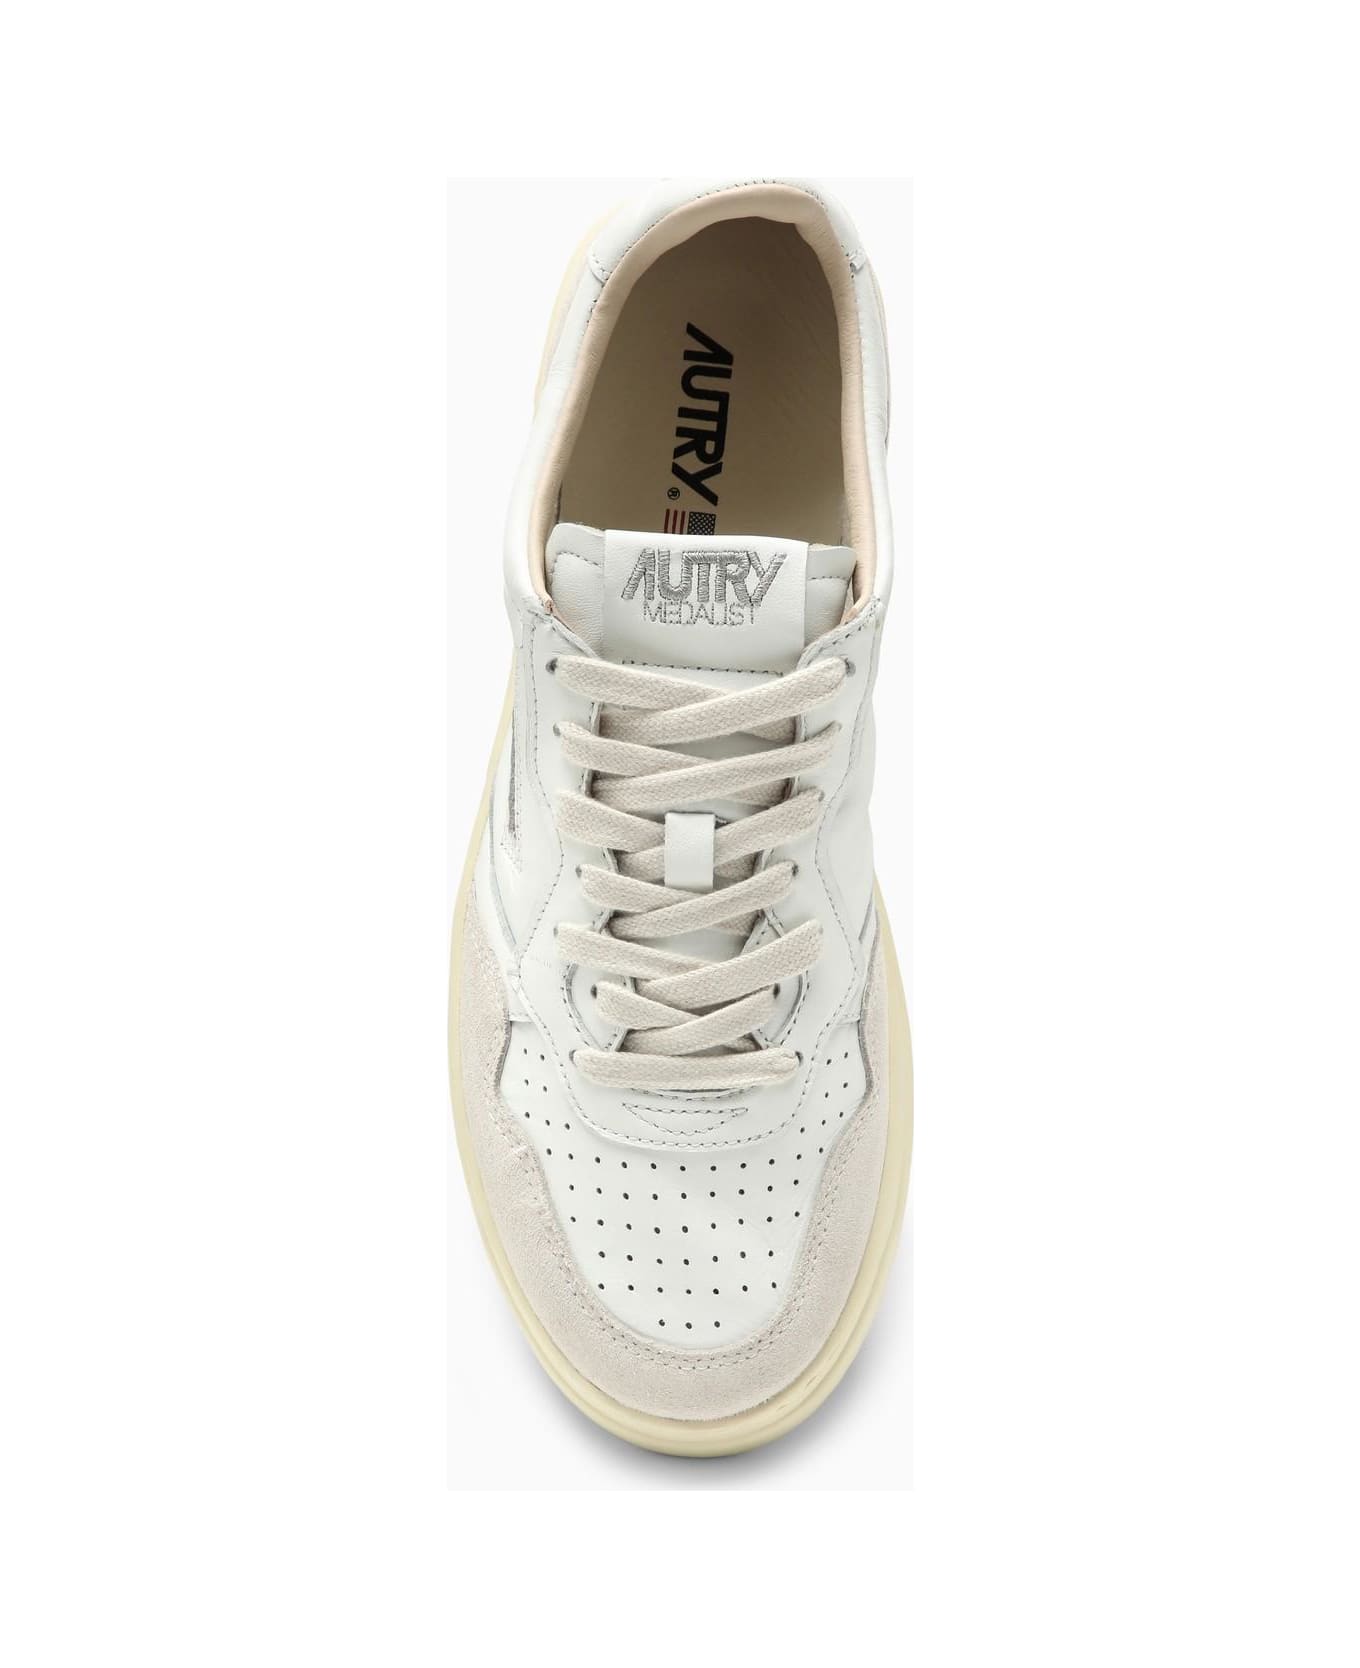 Autry Medalist Trainer In White Leather And Suede - White